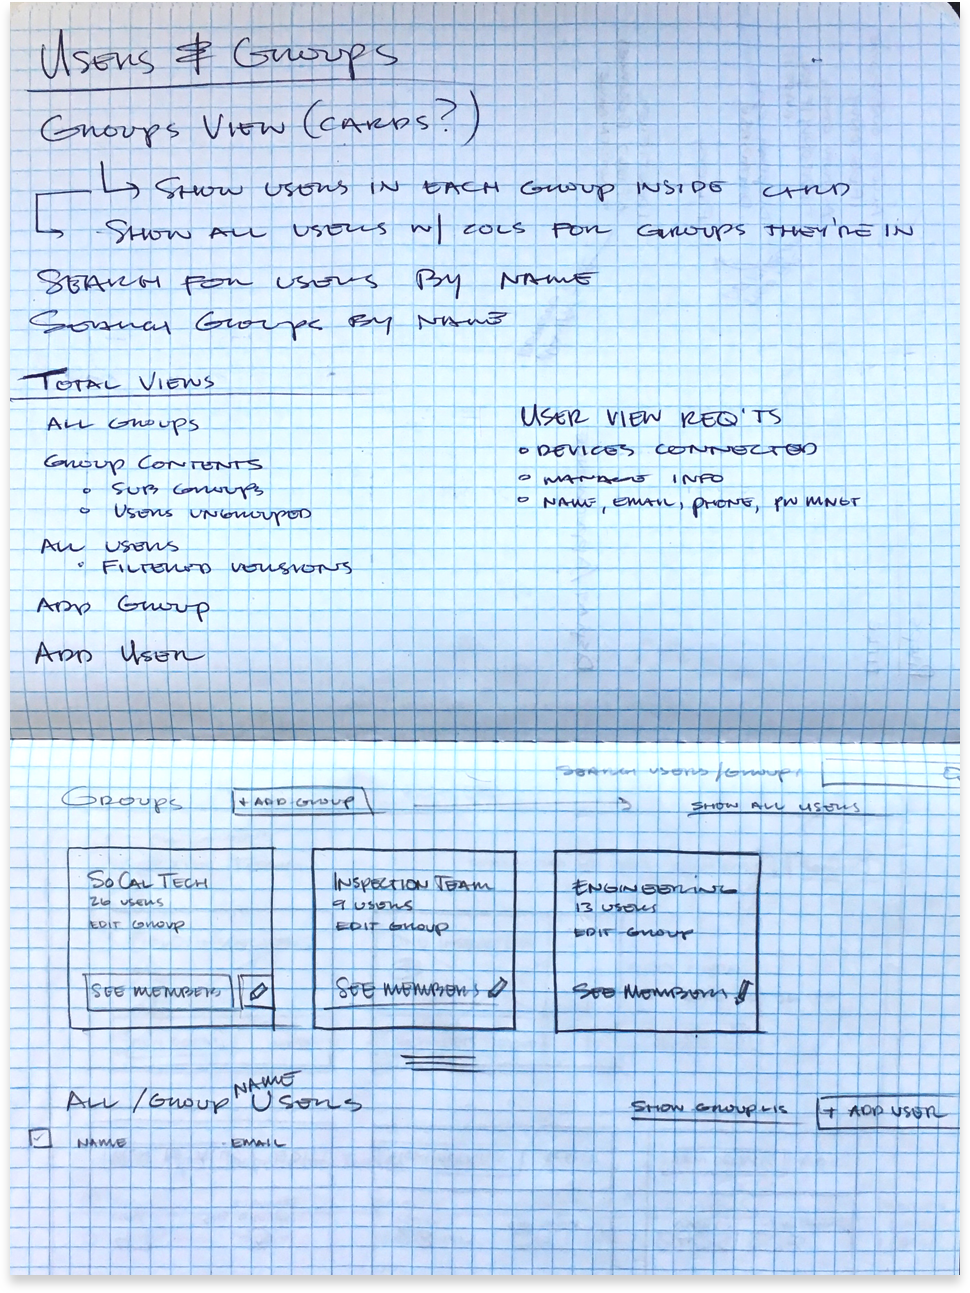 Accounting for all the controls and info via sketching